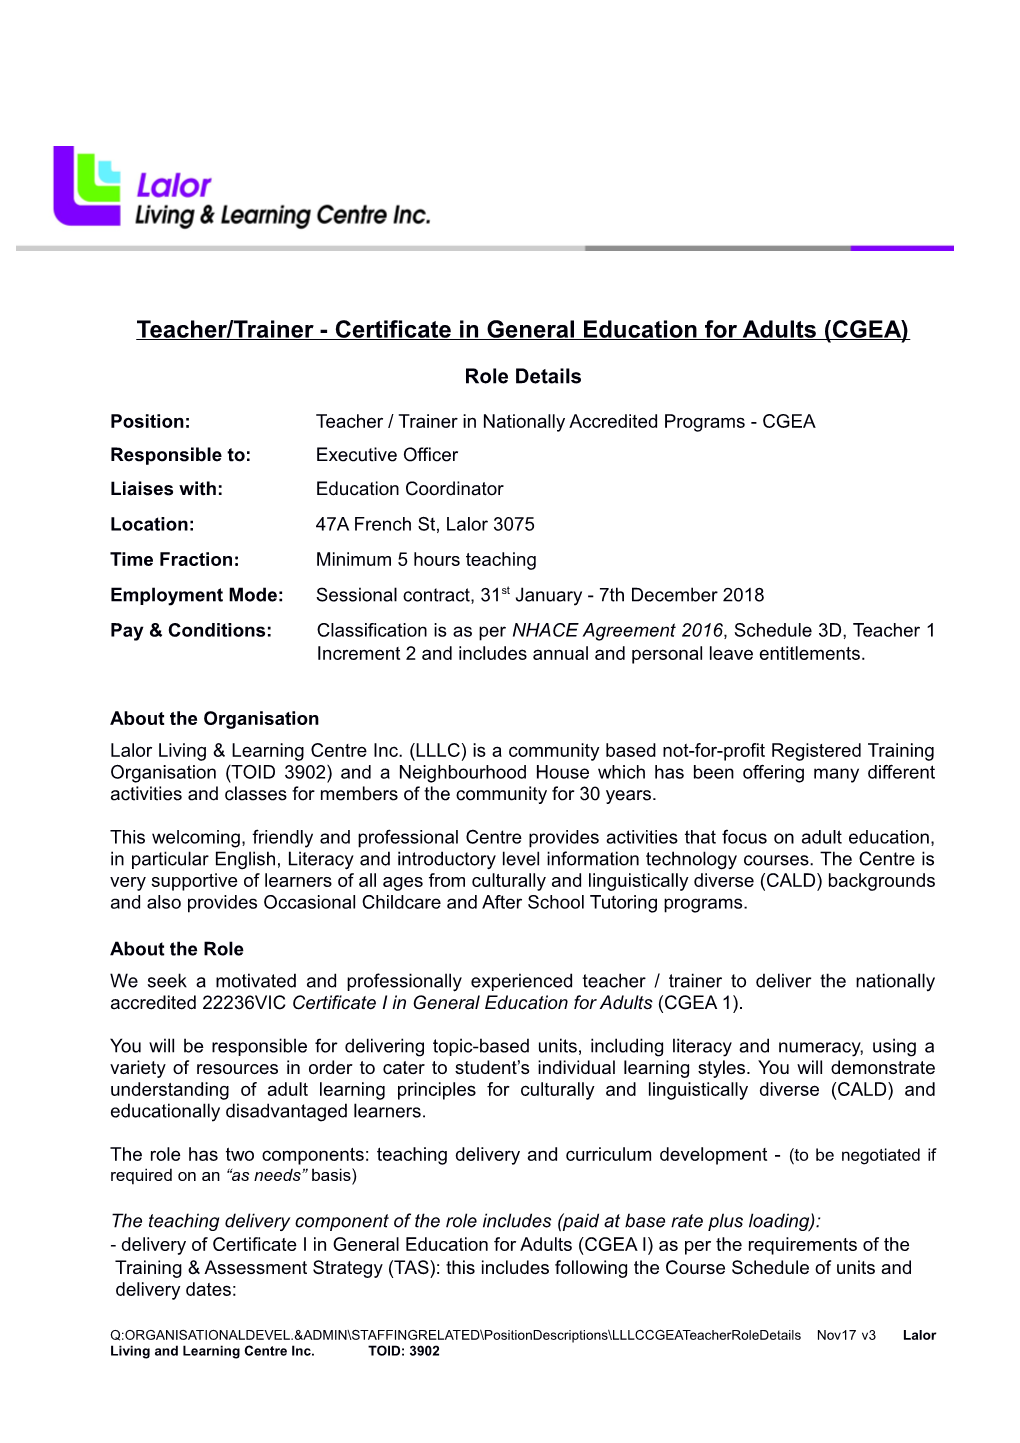 Teacher/Trainer - Certificate in General Education for Adults (CGEA)